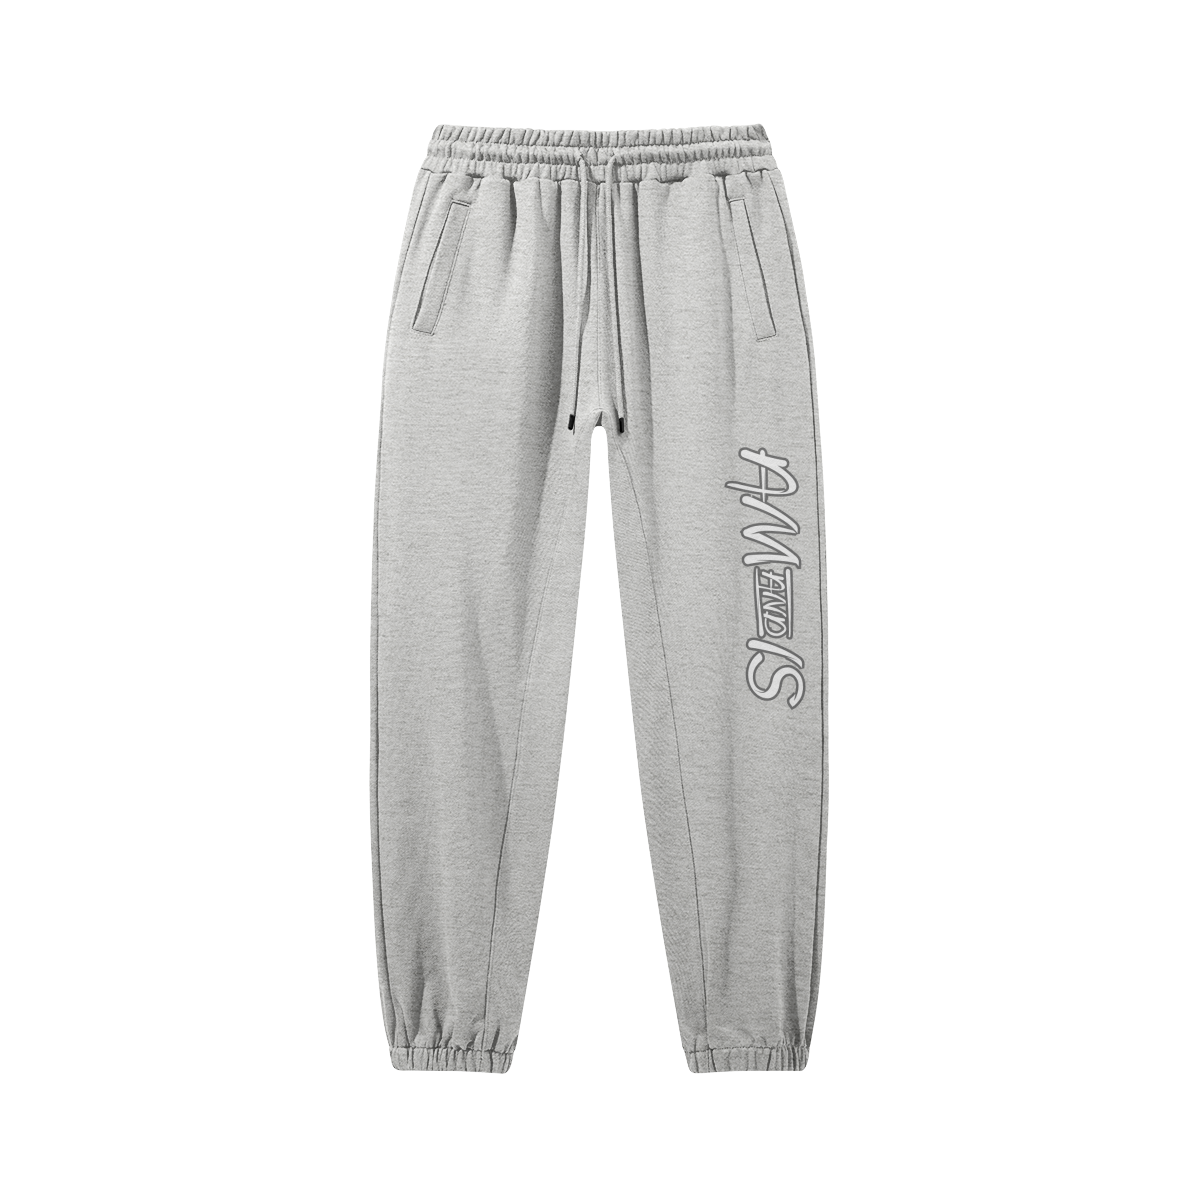 Heather Gray - Am&Is Unisex Heavyweight Baggy Sweatpants0 - unisex pants at TFC&H Co.